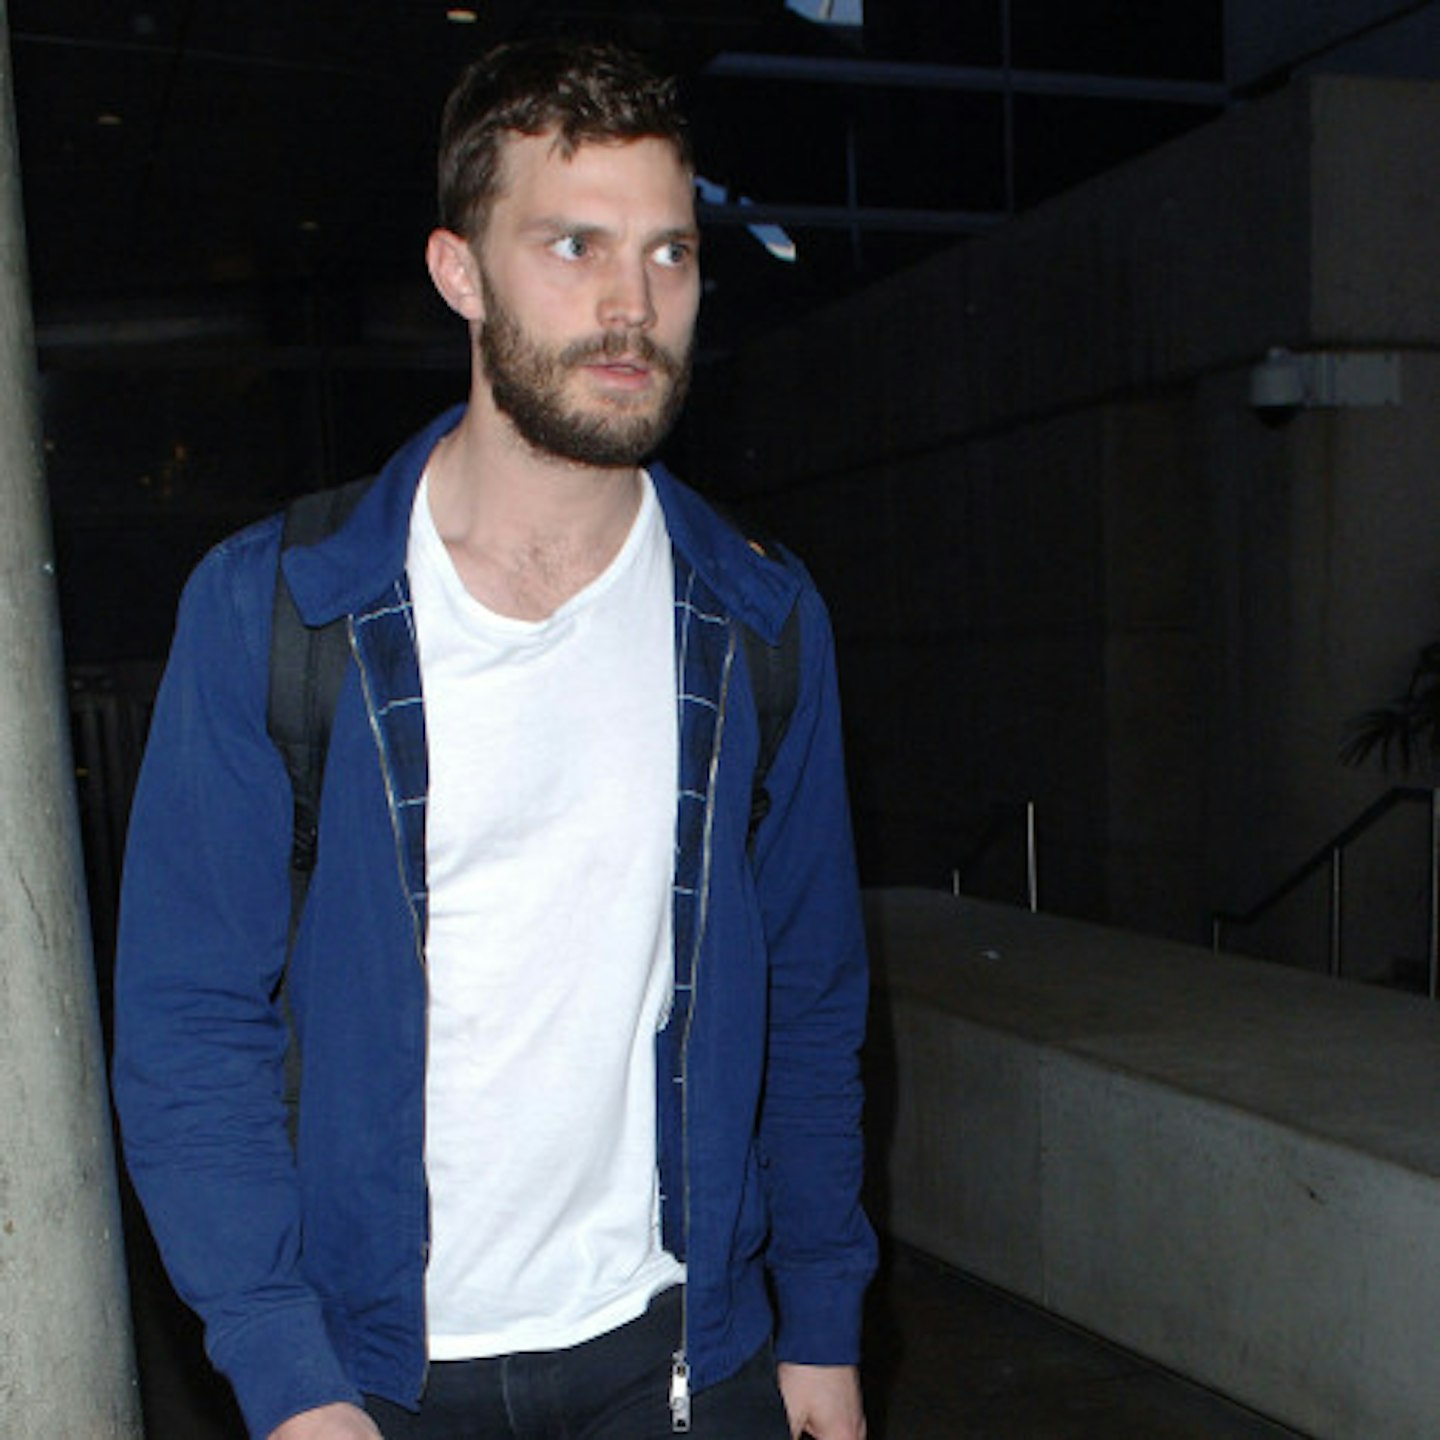 Jamie followed a woman on the tube to get into character